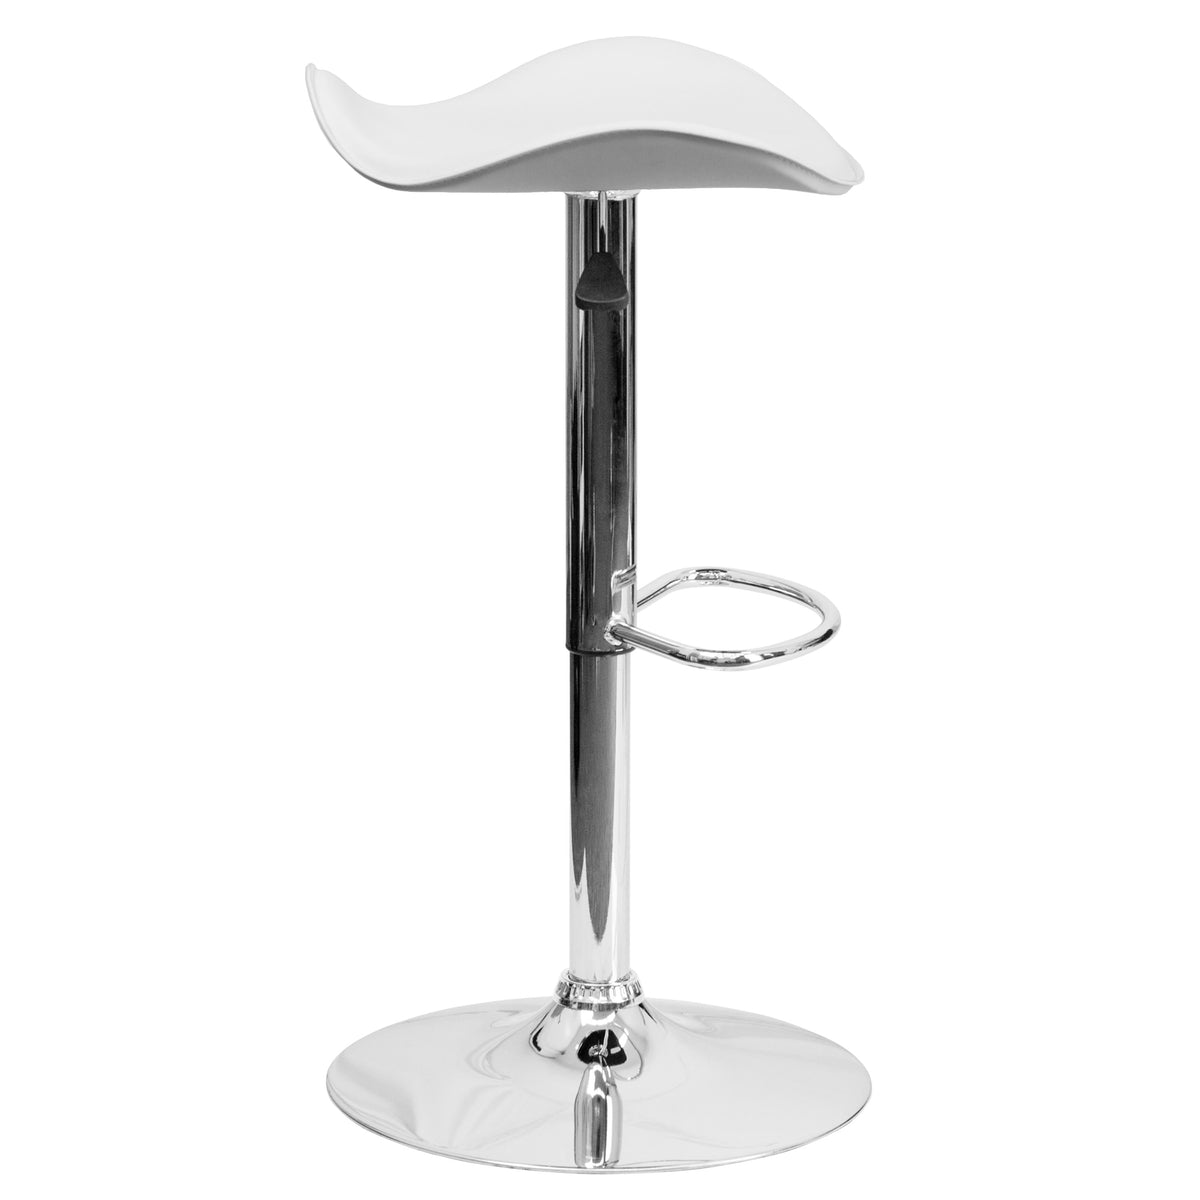 White |#| Contemporary White Vinyl Adjustable Height Barstool with Wavy Seat & Chrome Base